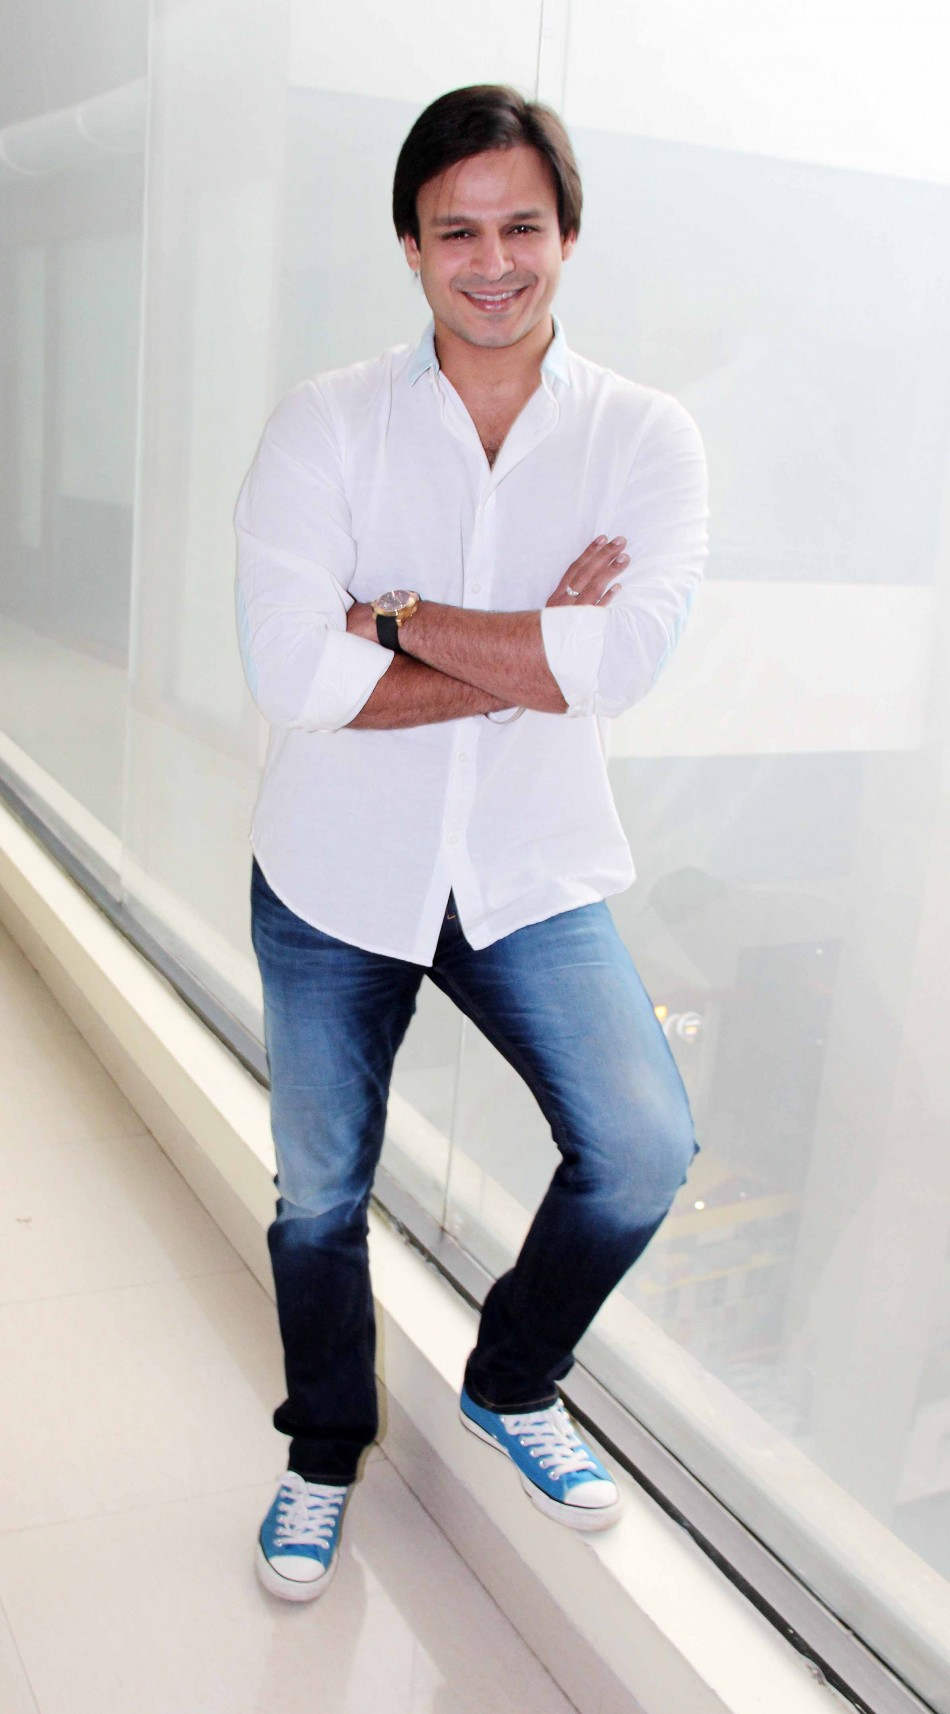 Vivek Wearing White Shirt And Jeans